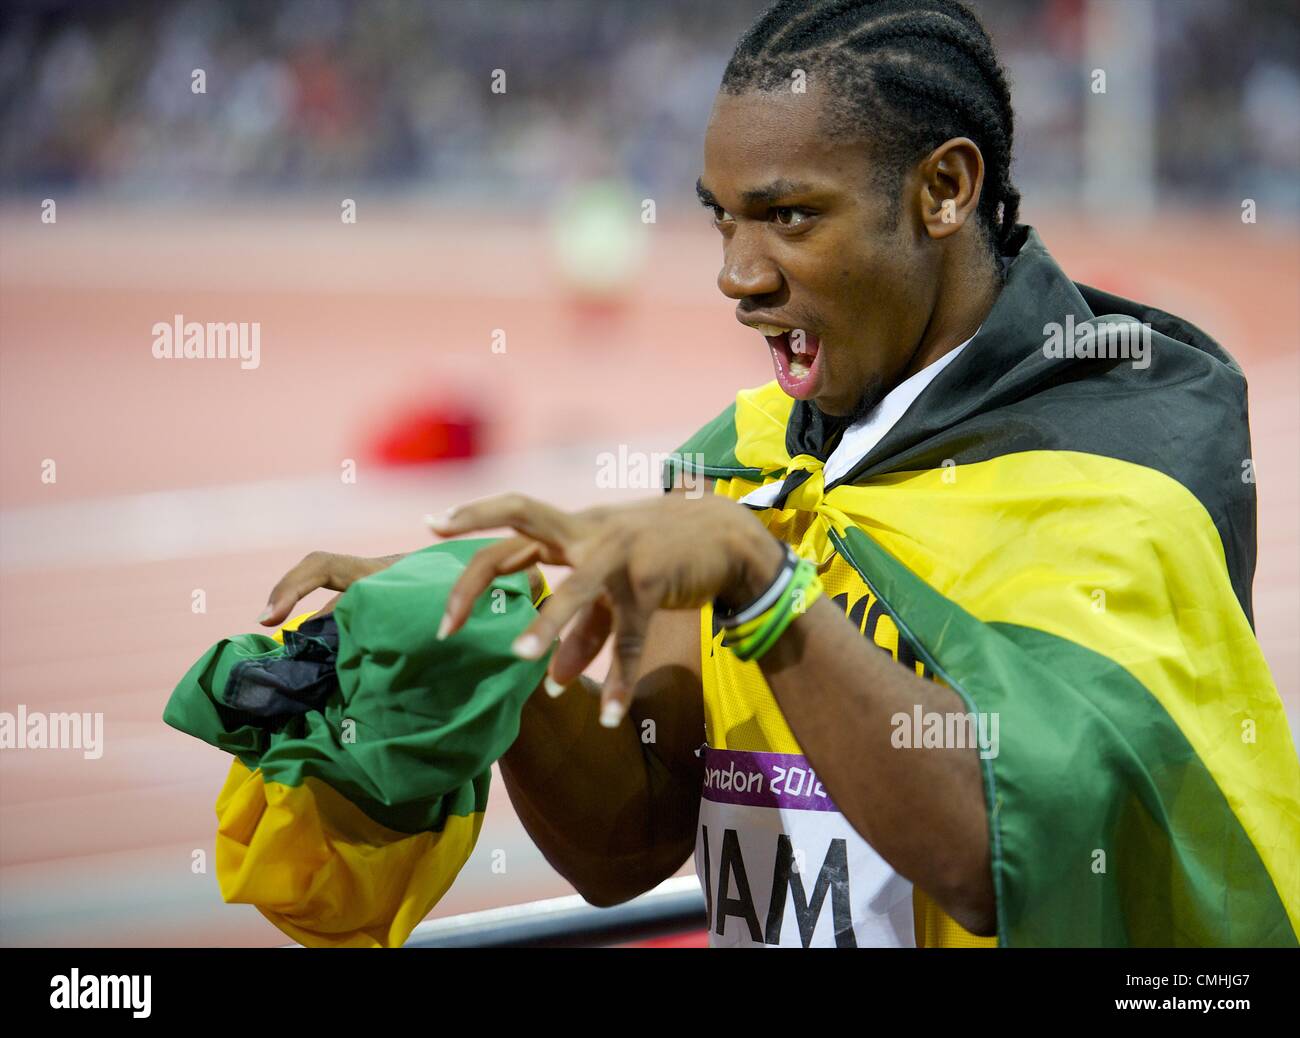 Aug. 11, 2012 - London, England, United Kingdom - YOHAN BLAKE, a member of the Jamaican 4x100m relay team, poses for the cameras after winning gold and setting a new world record of 36.84 seconds during the 2012 London Summer Olympics. (Credit Image: © Mark Makela/ZUMAPRESS.com) Stock Photo